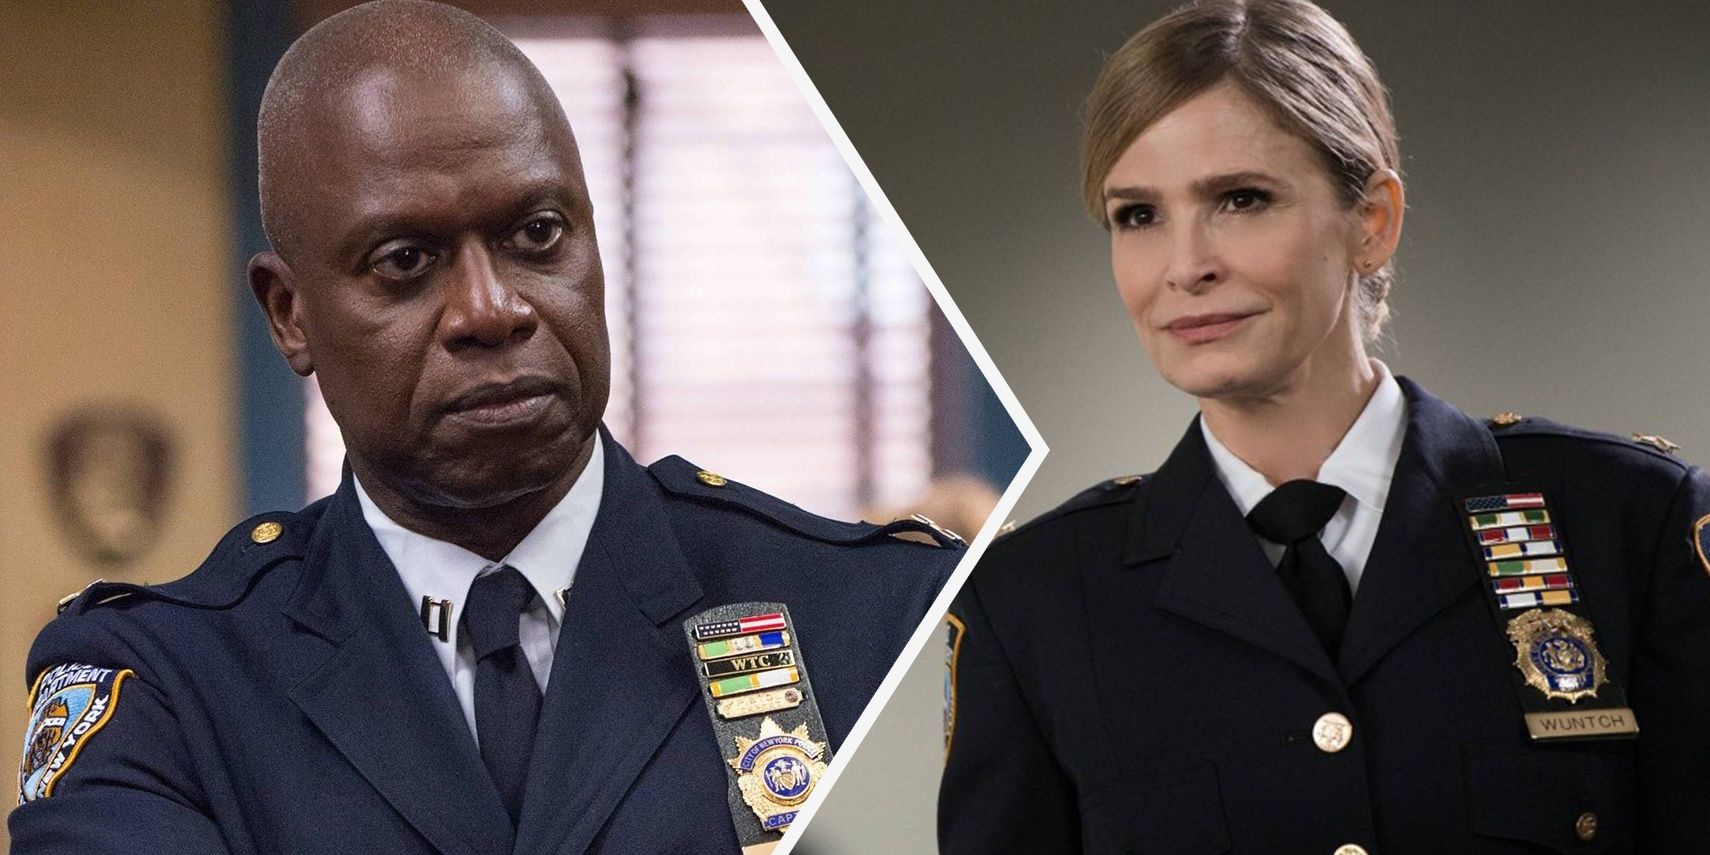 Kyra Sedgwick as Wuntch and Andre Braugher as Holt